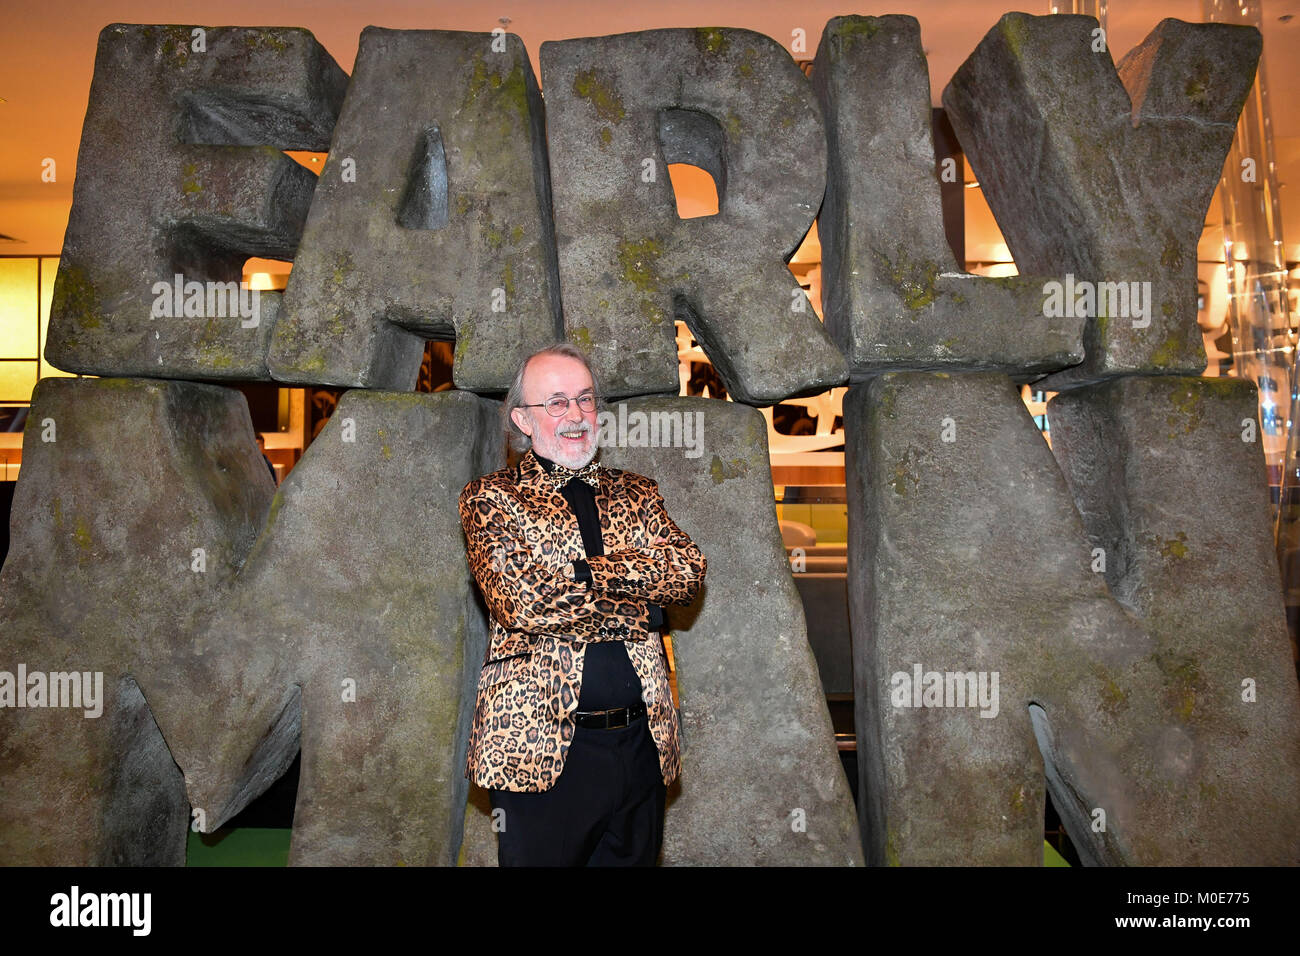 Peter Lord, CBE, animator, film producer, director and co-founder of Aardman Animations, attends the screening of the new Nick Park film Early Man at Showcase Cinema de Lux, in Bristol. Stock Photo